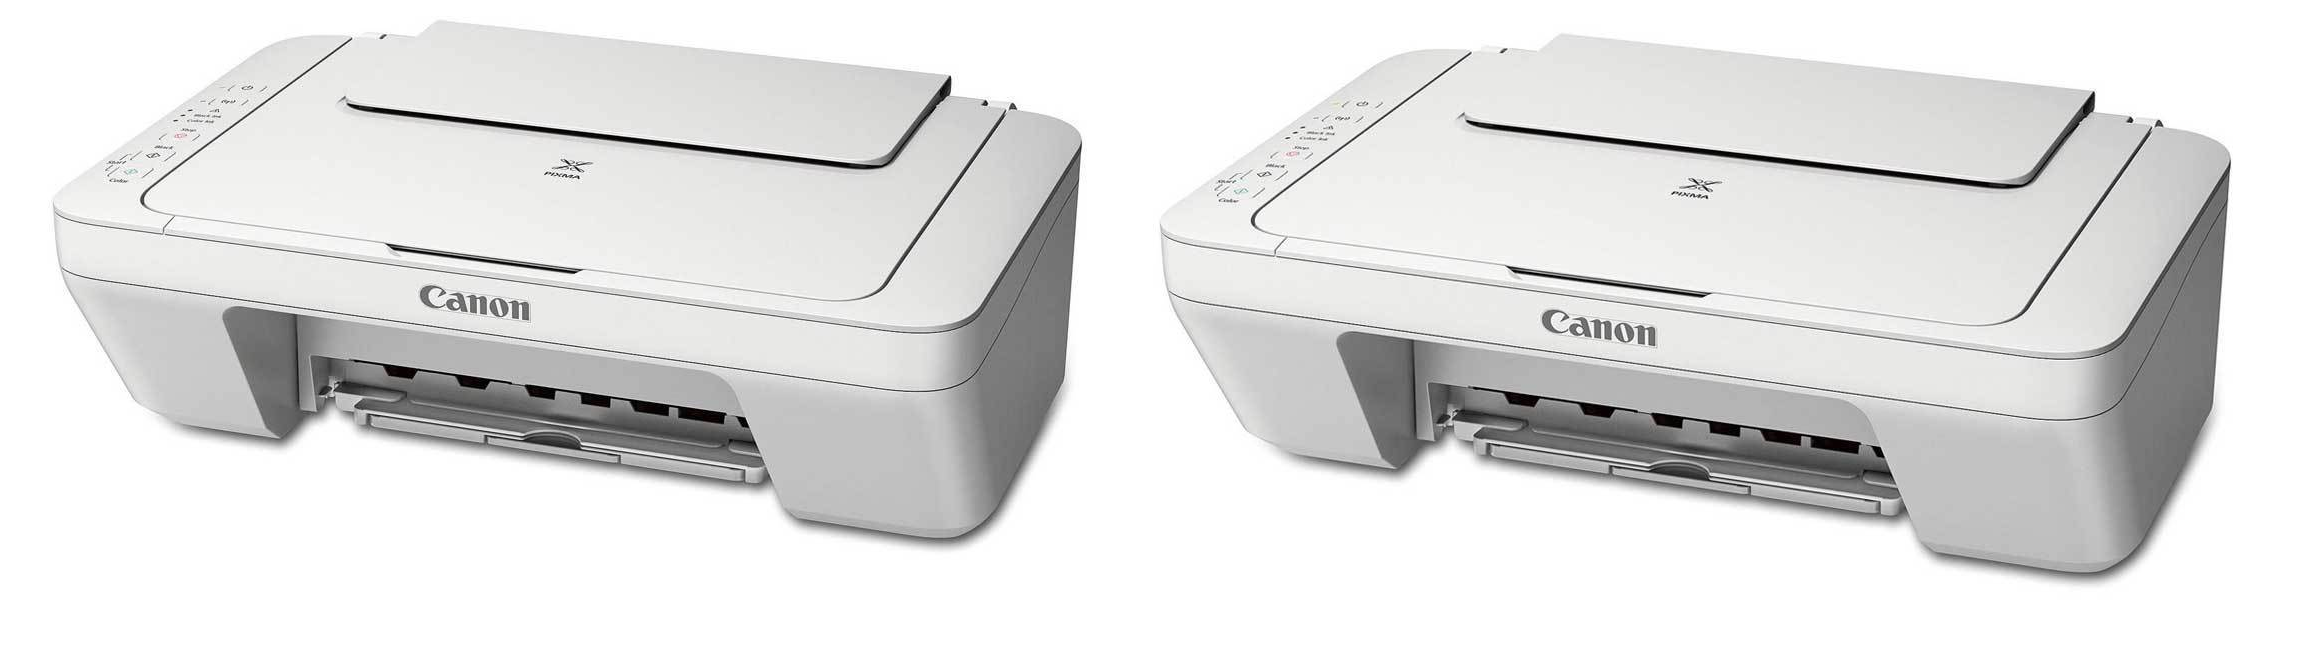 Canon Pixma All-in-One Color Printer/Scanner/Copier 2-pack Only $32.99!